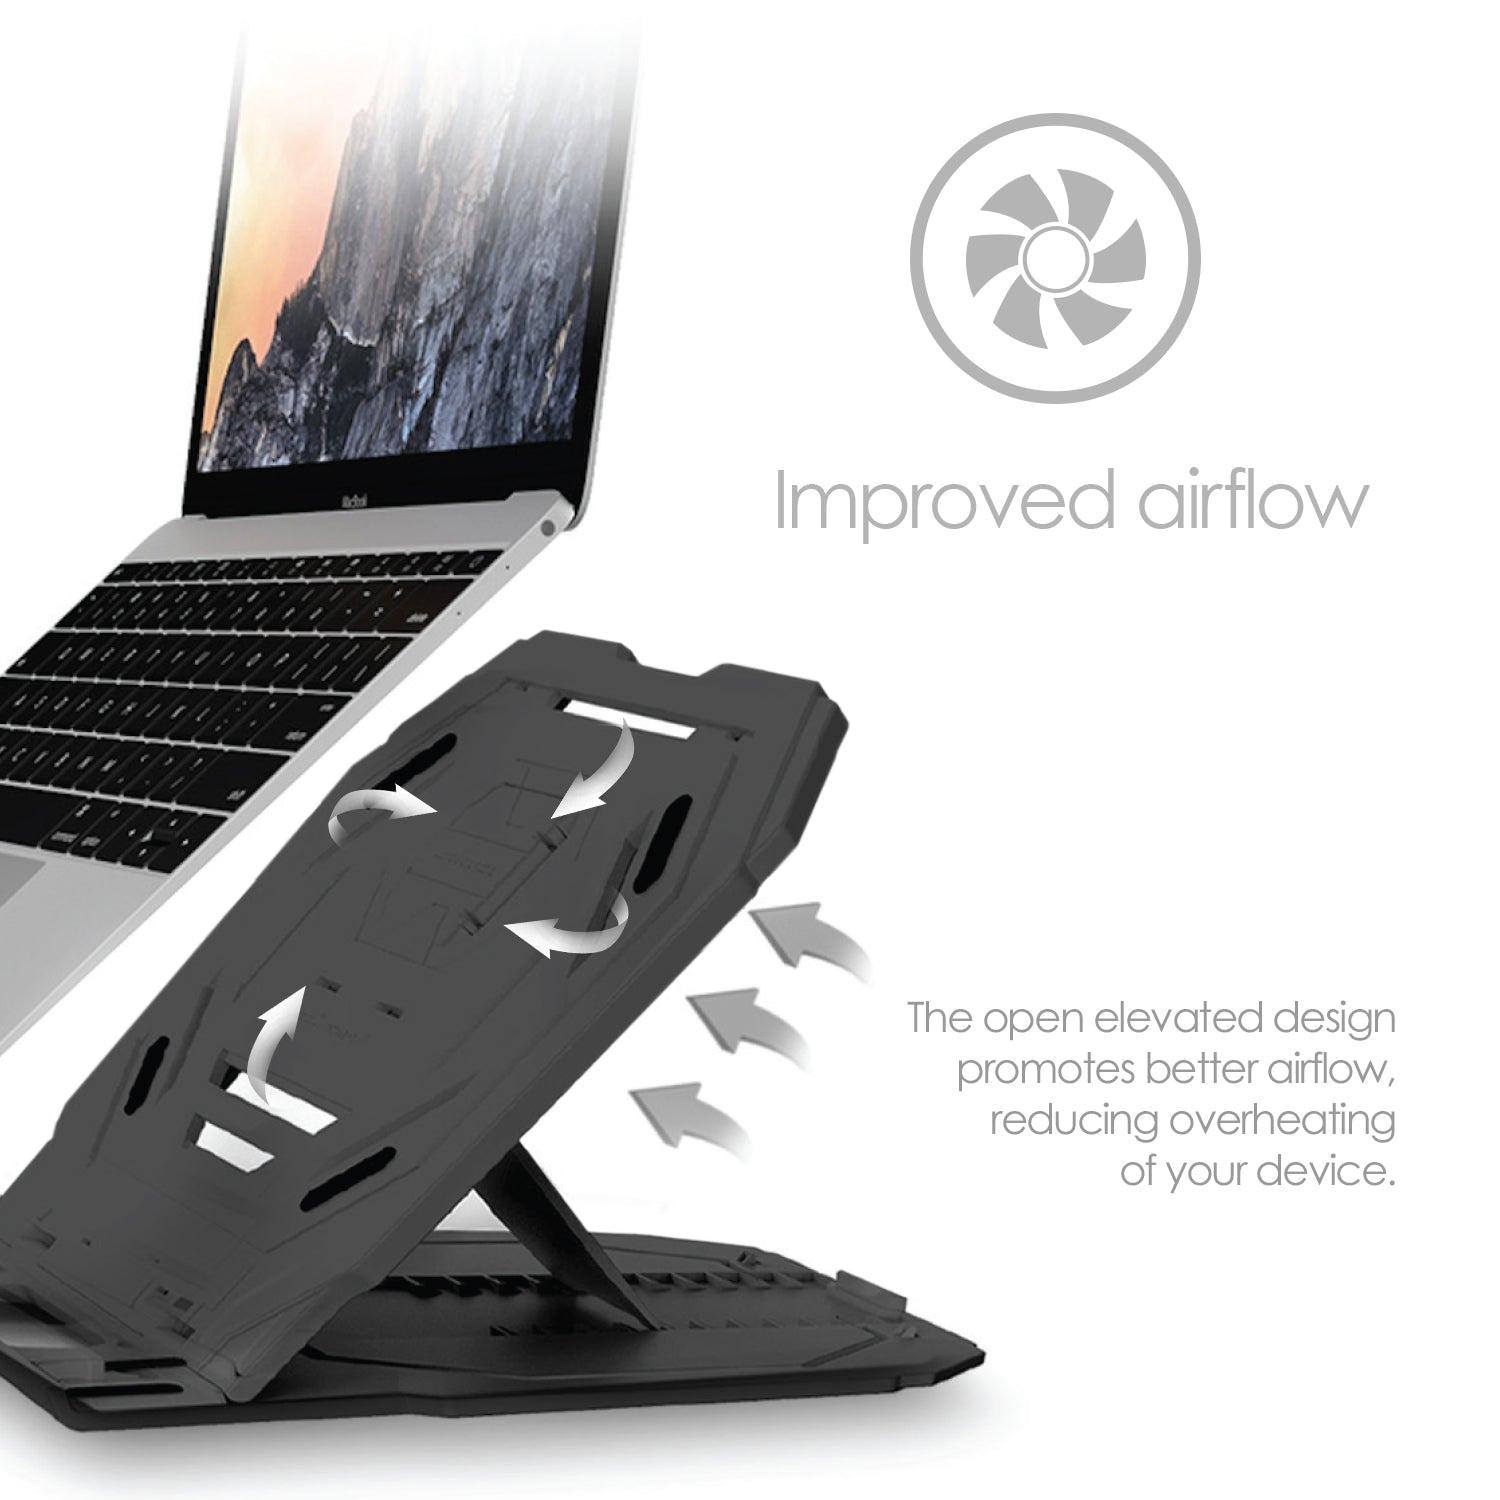 Macbook pro about to be placed on black laptop  stand. Image shows the added ventilation for the laptop.  text reads "improved airflow" and "the open elevated design promotes better airflow, reducing overheating of your device" 